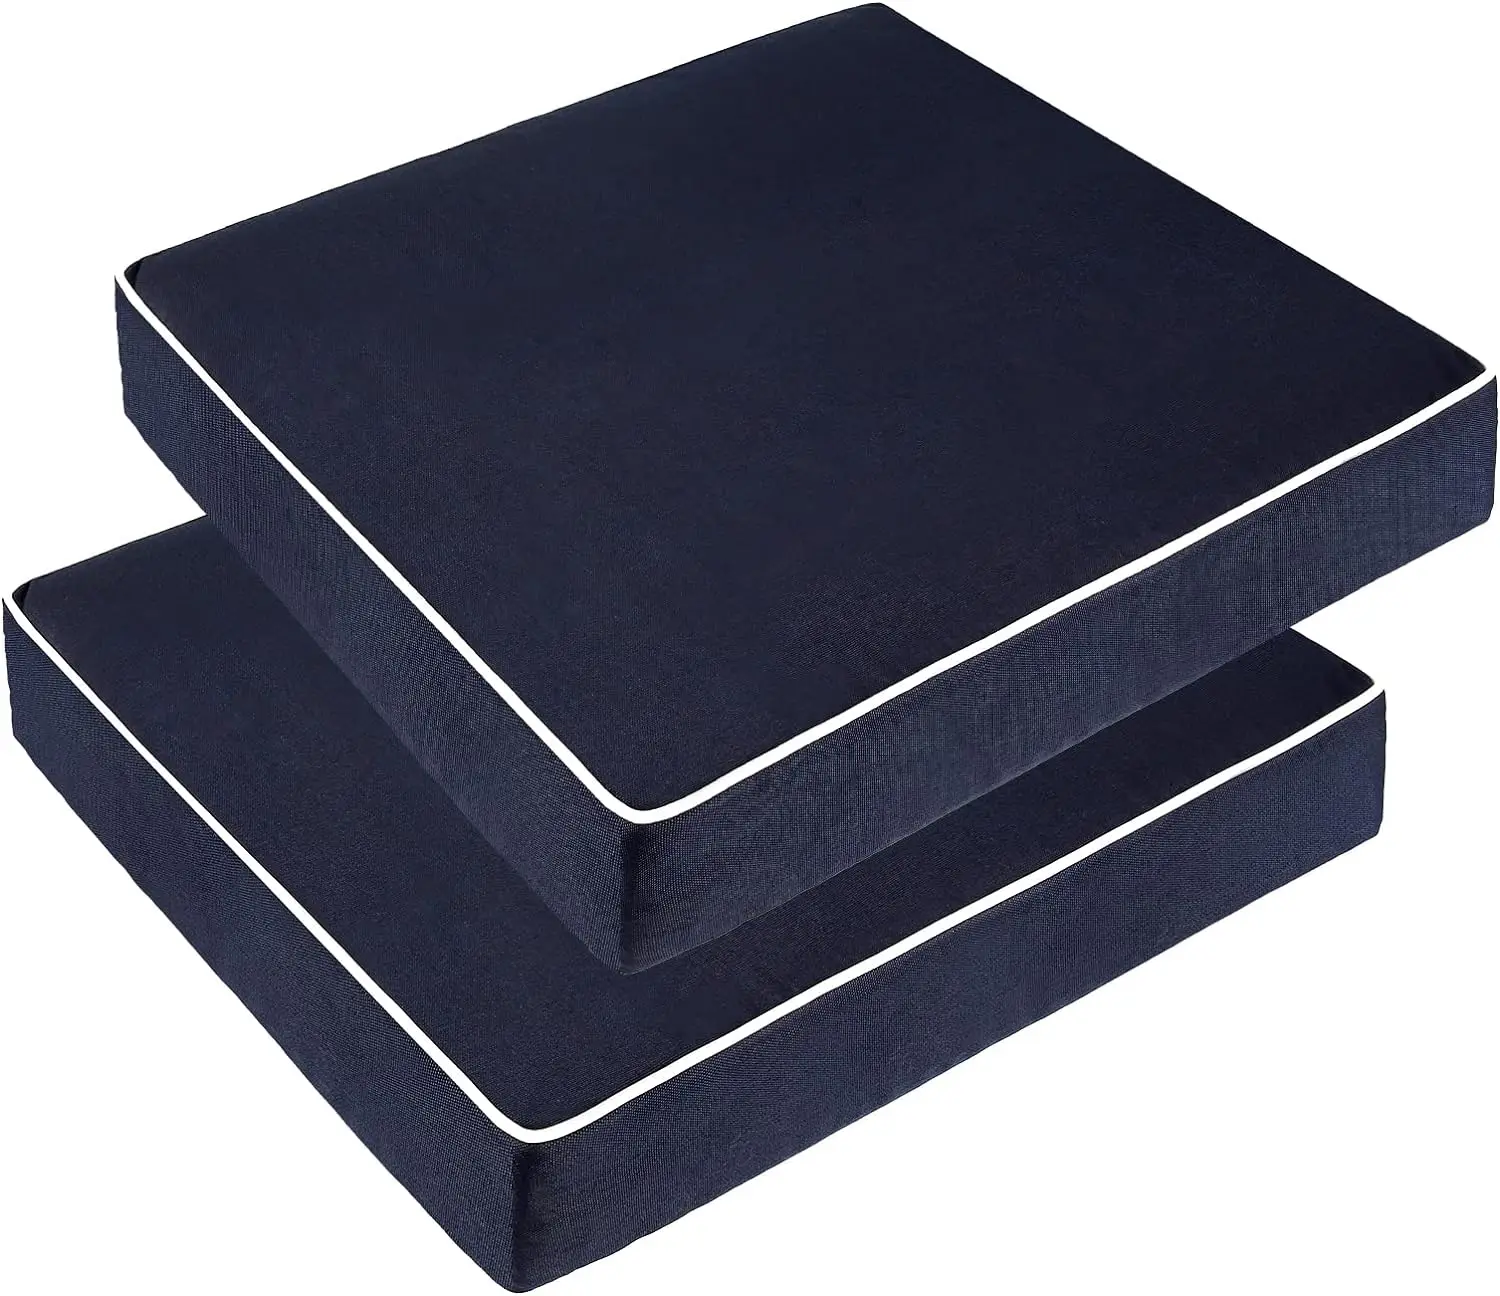 

Pack Outdoor Chair Cushion 20" X 20" X 4", Waterproof Outdoor Seat Cushions with Non-Skid Ties, Navy Blue02 (Cushion